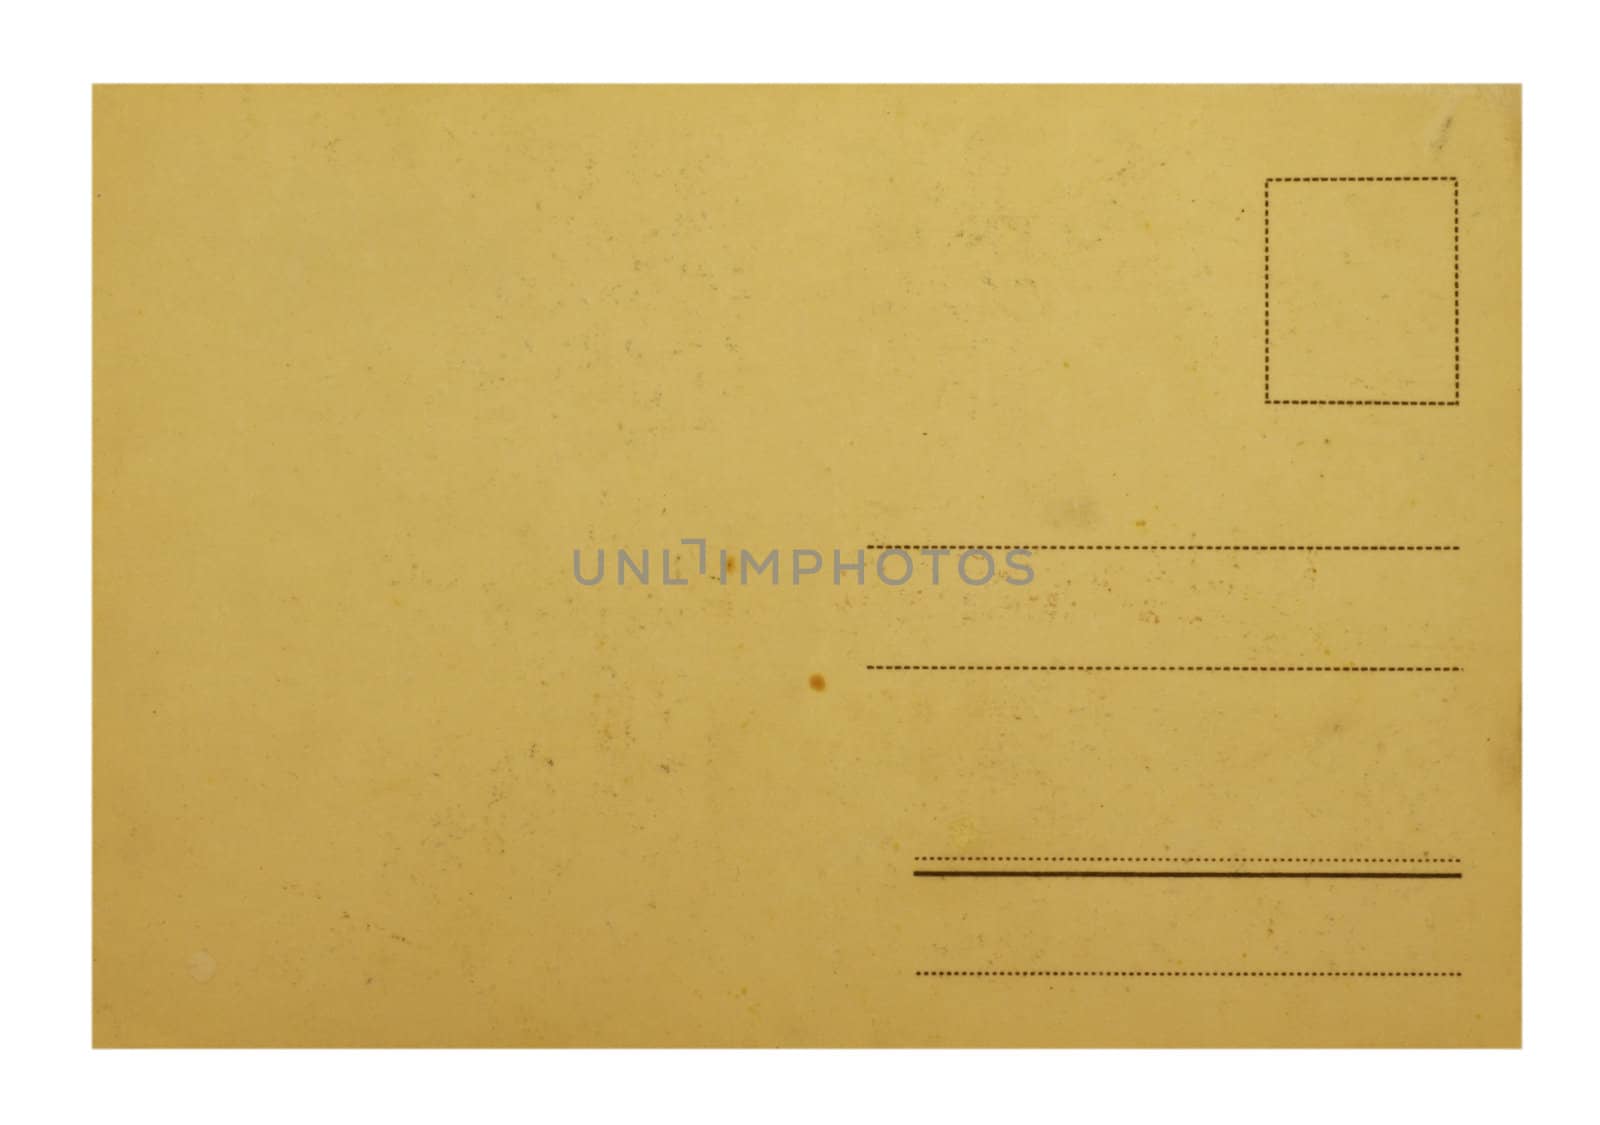 Vintage postcard isolated in white